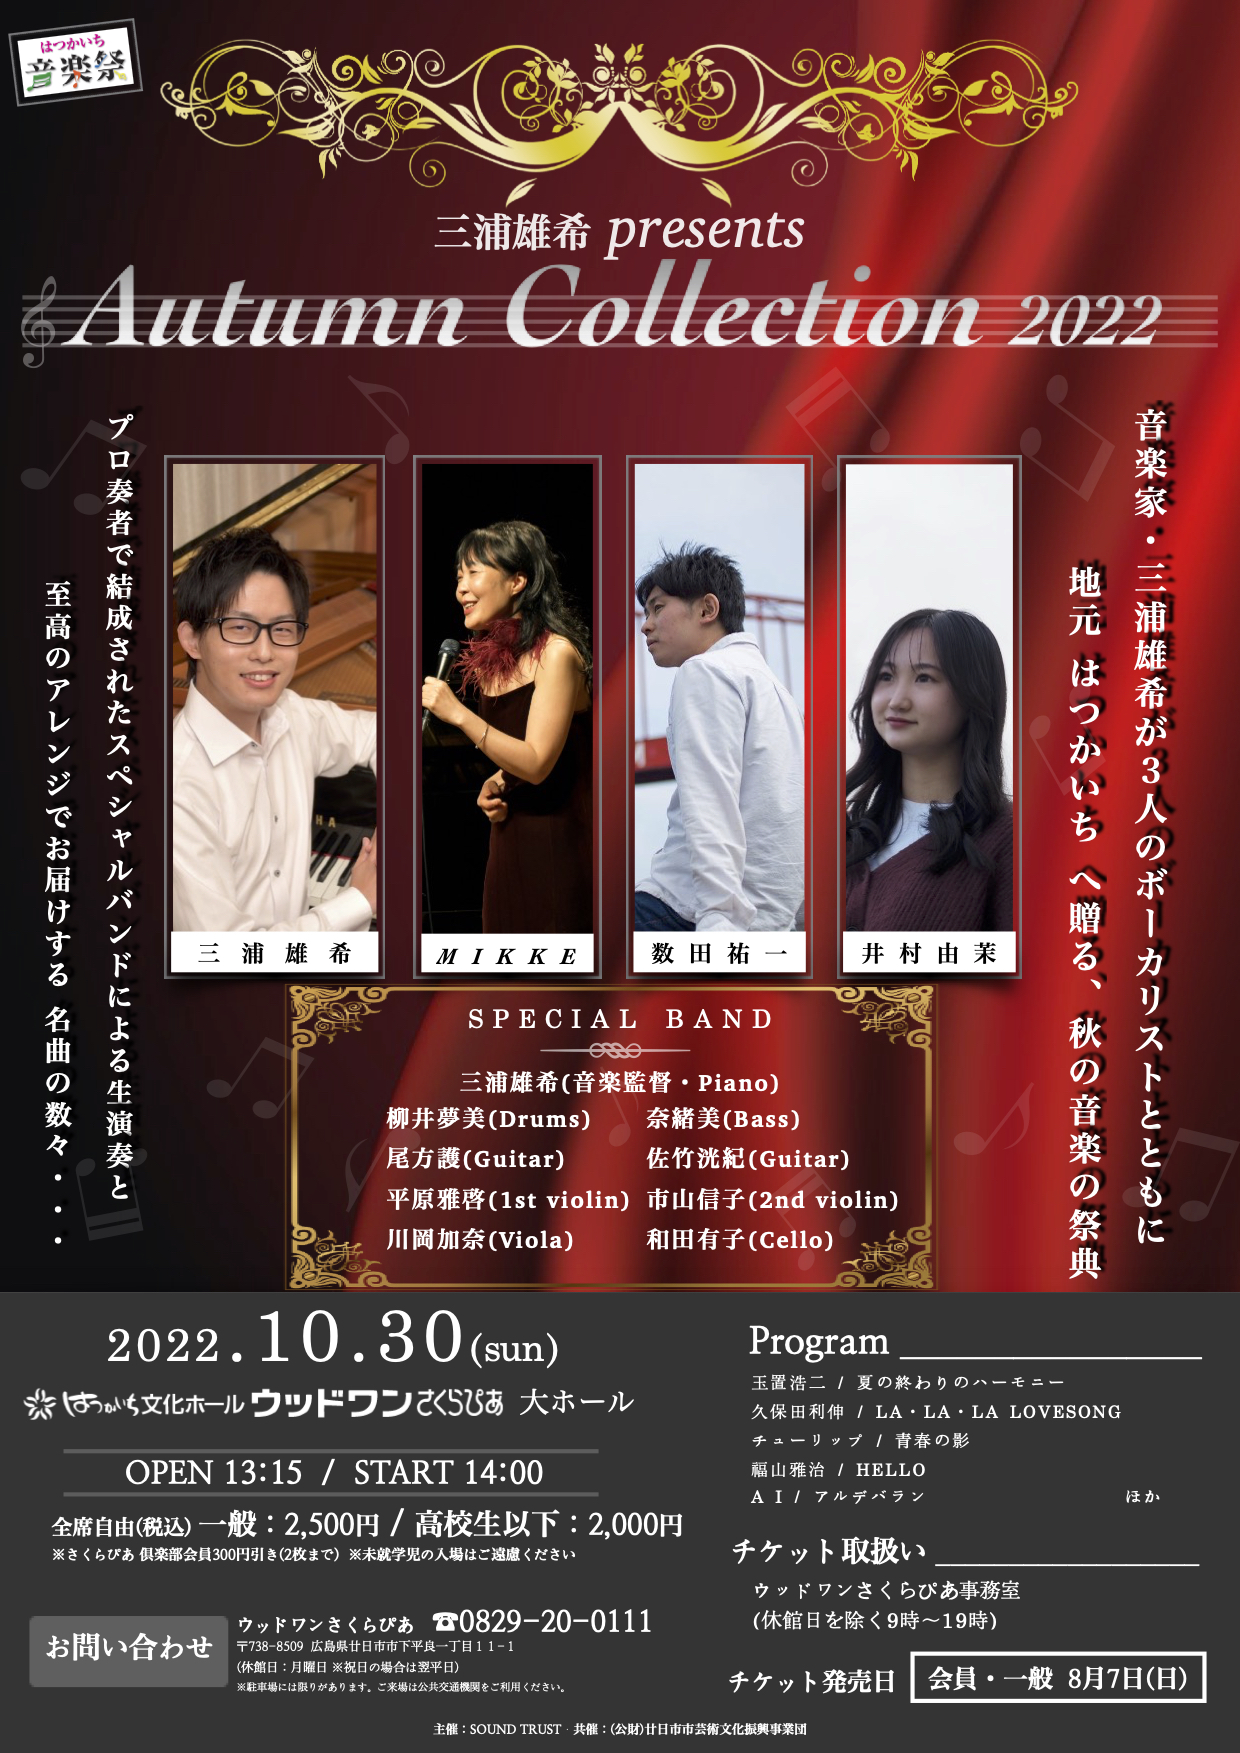 「Autumn Collection 2022」を開催いたします！